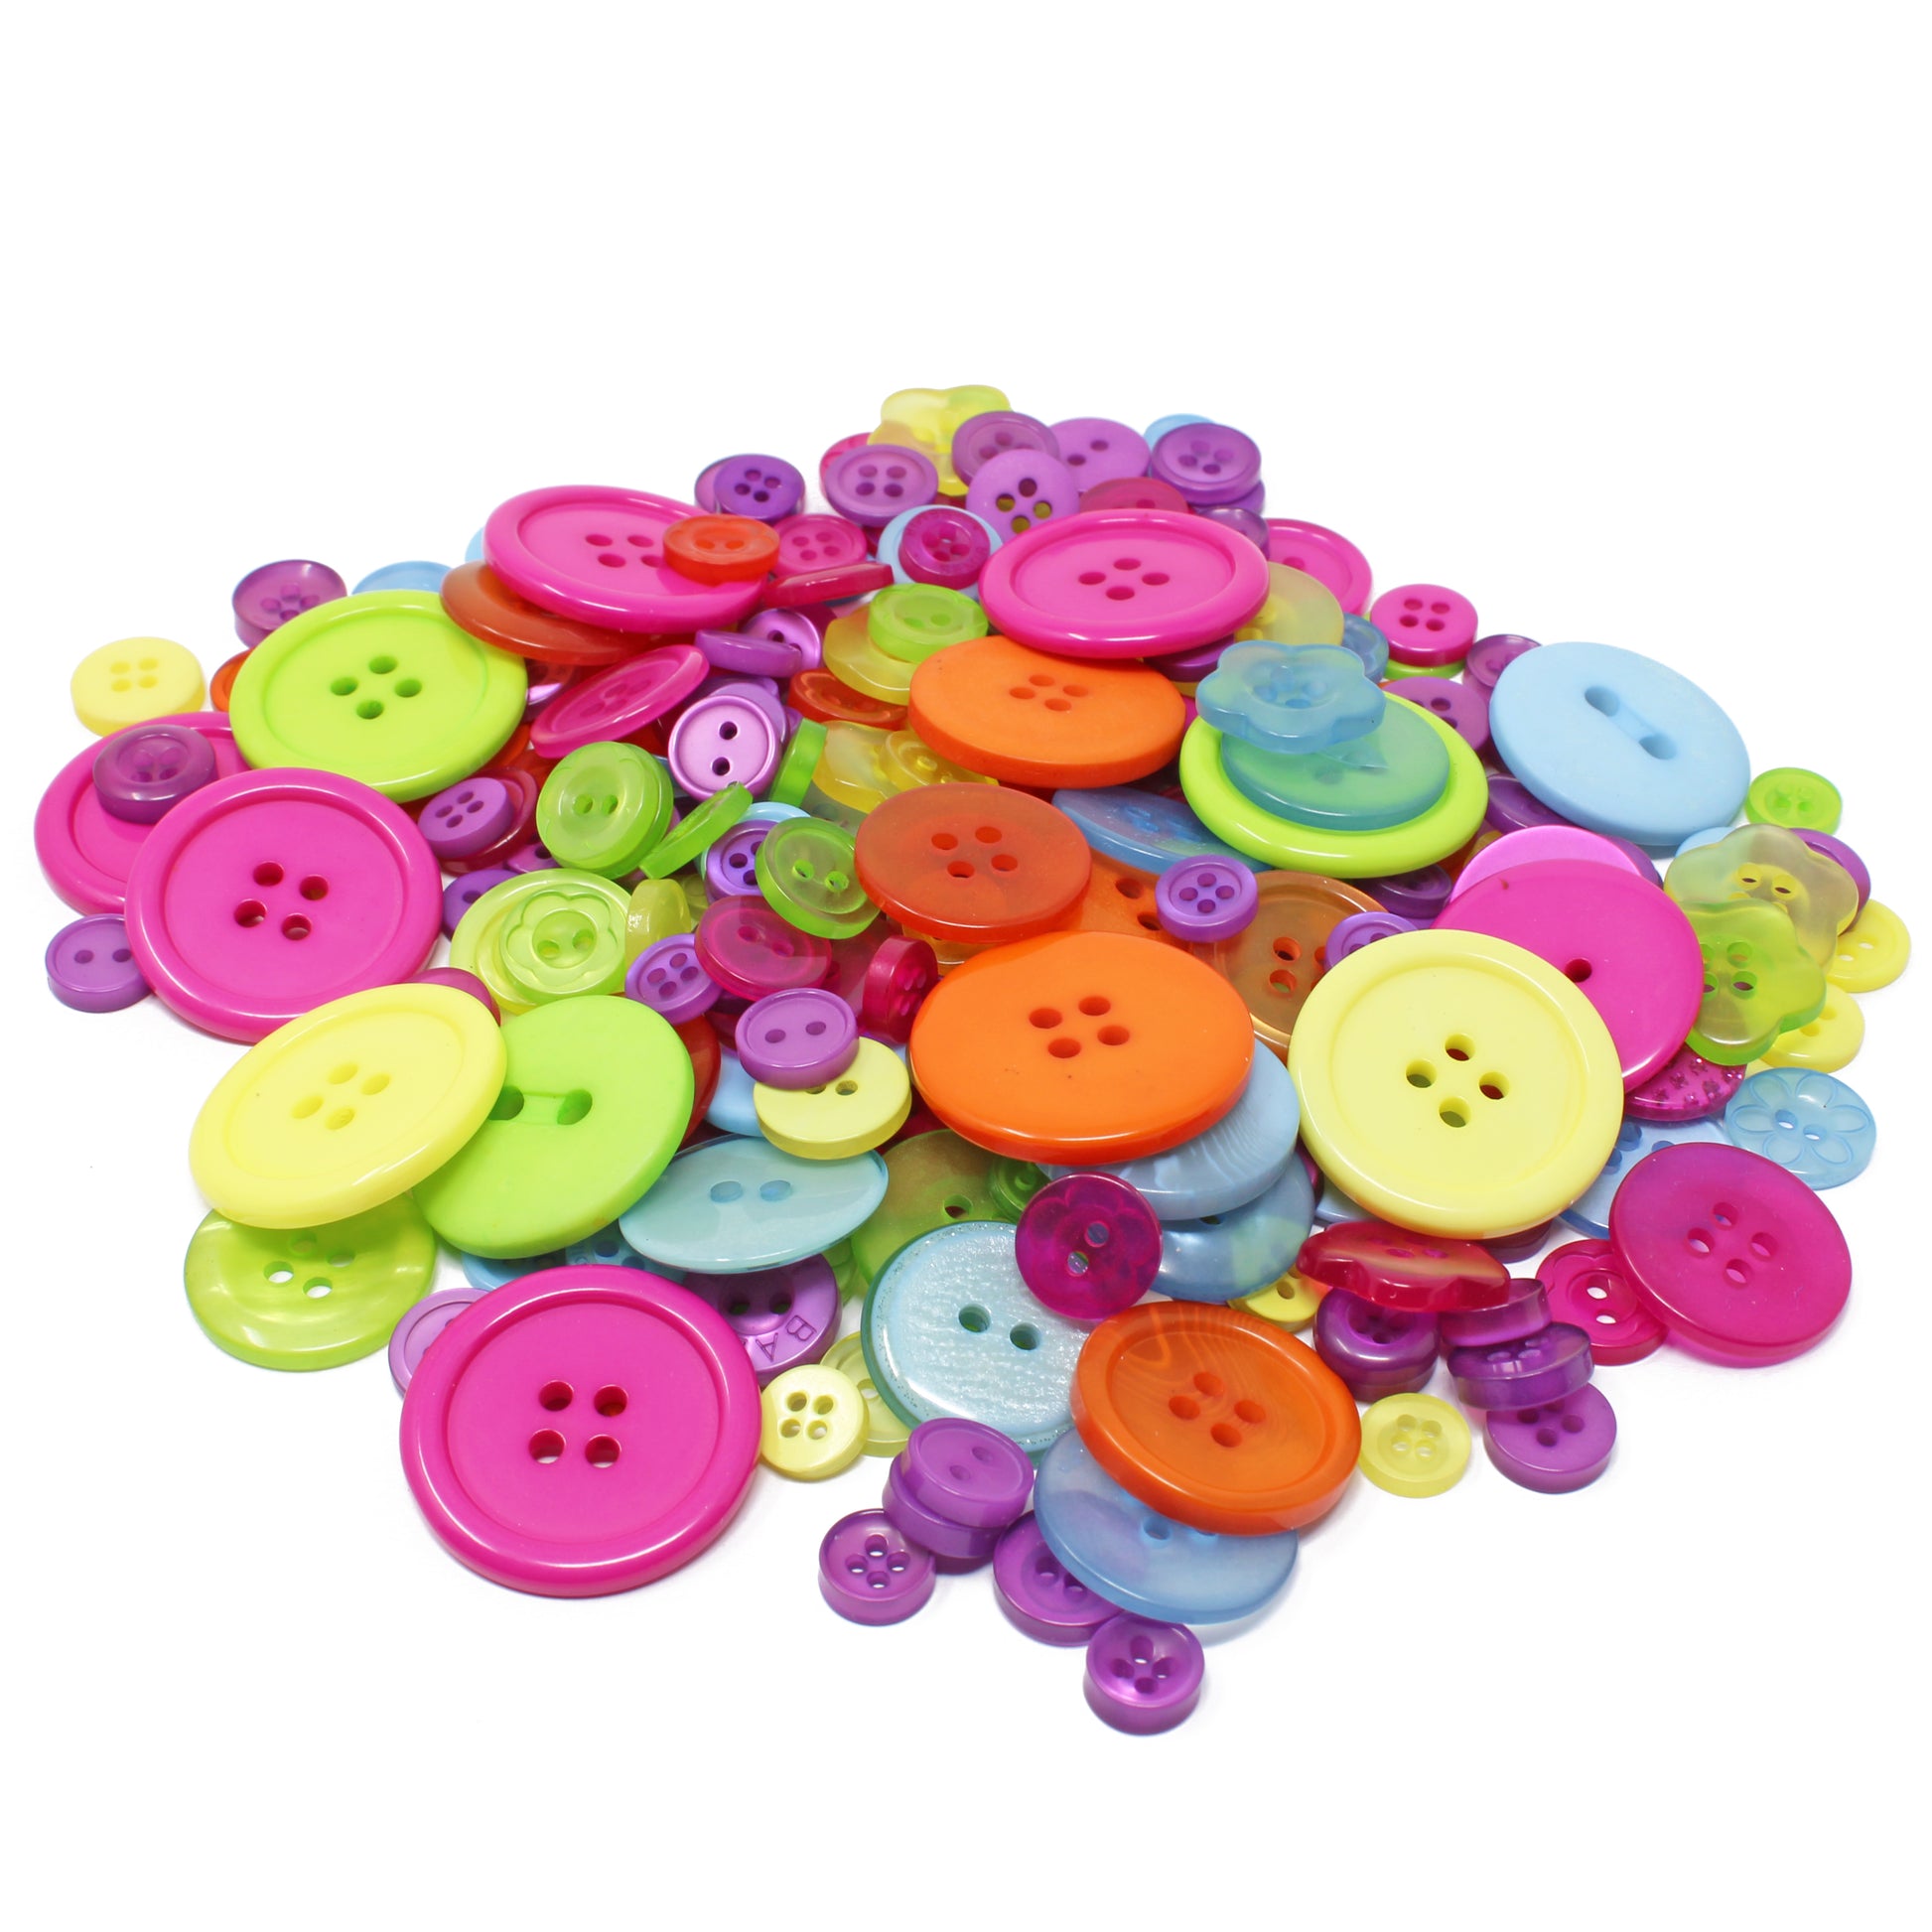 Bright Mix 100g Bags Of Mix Acrylic & Resin Buttons